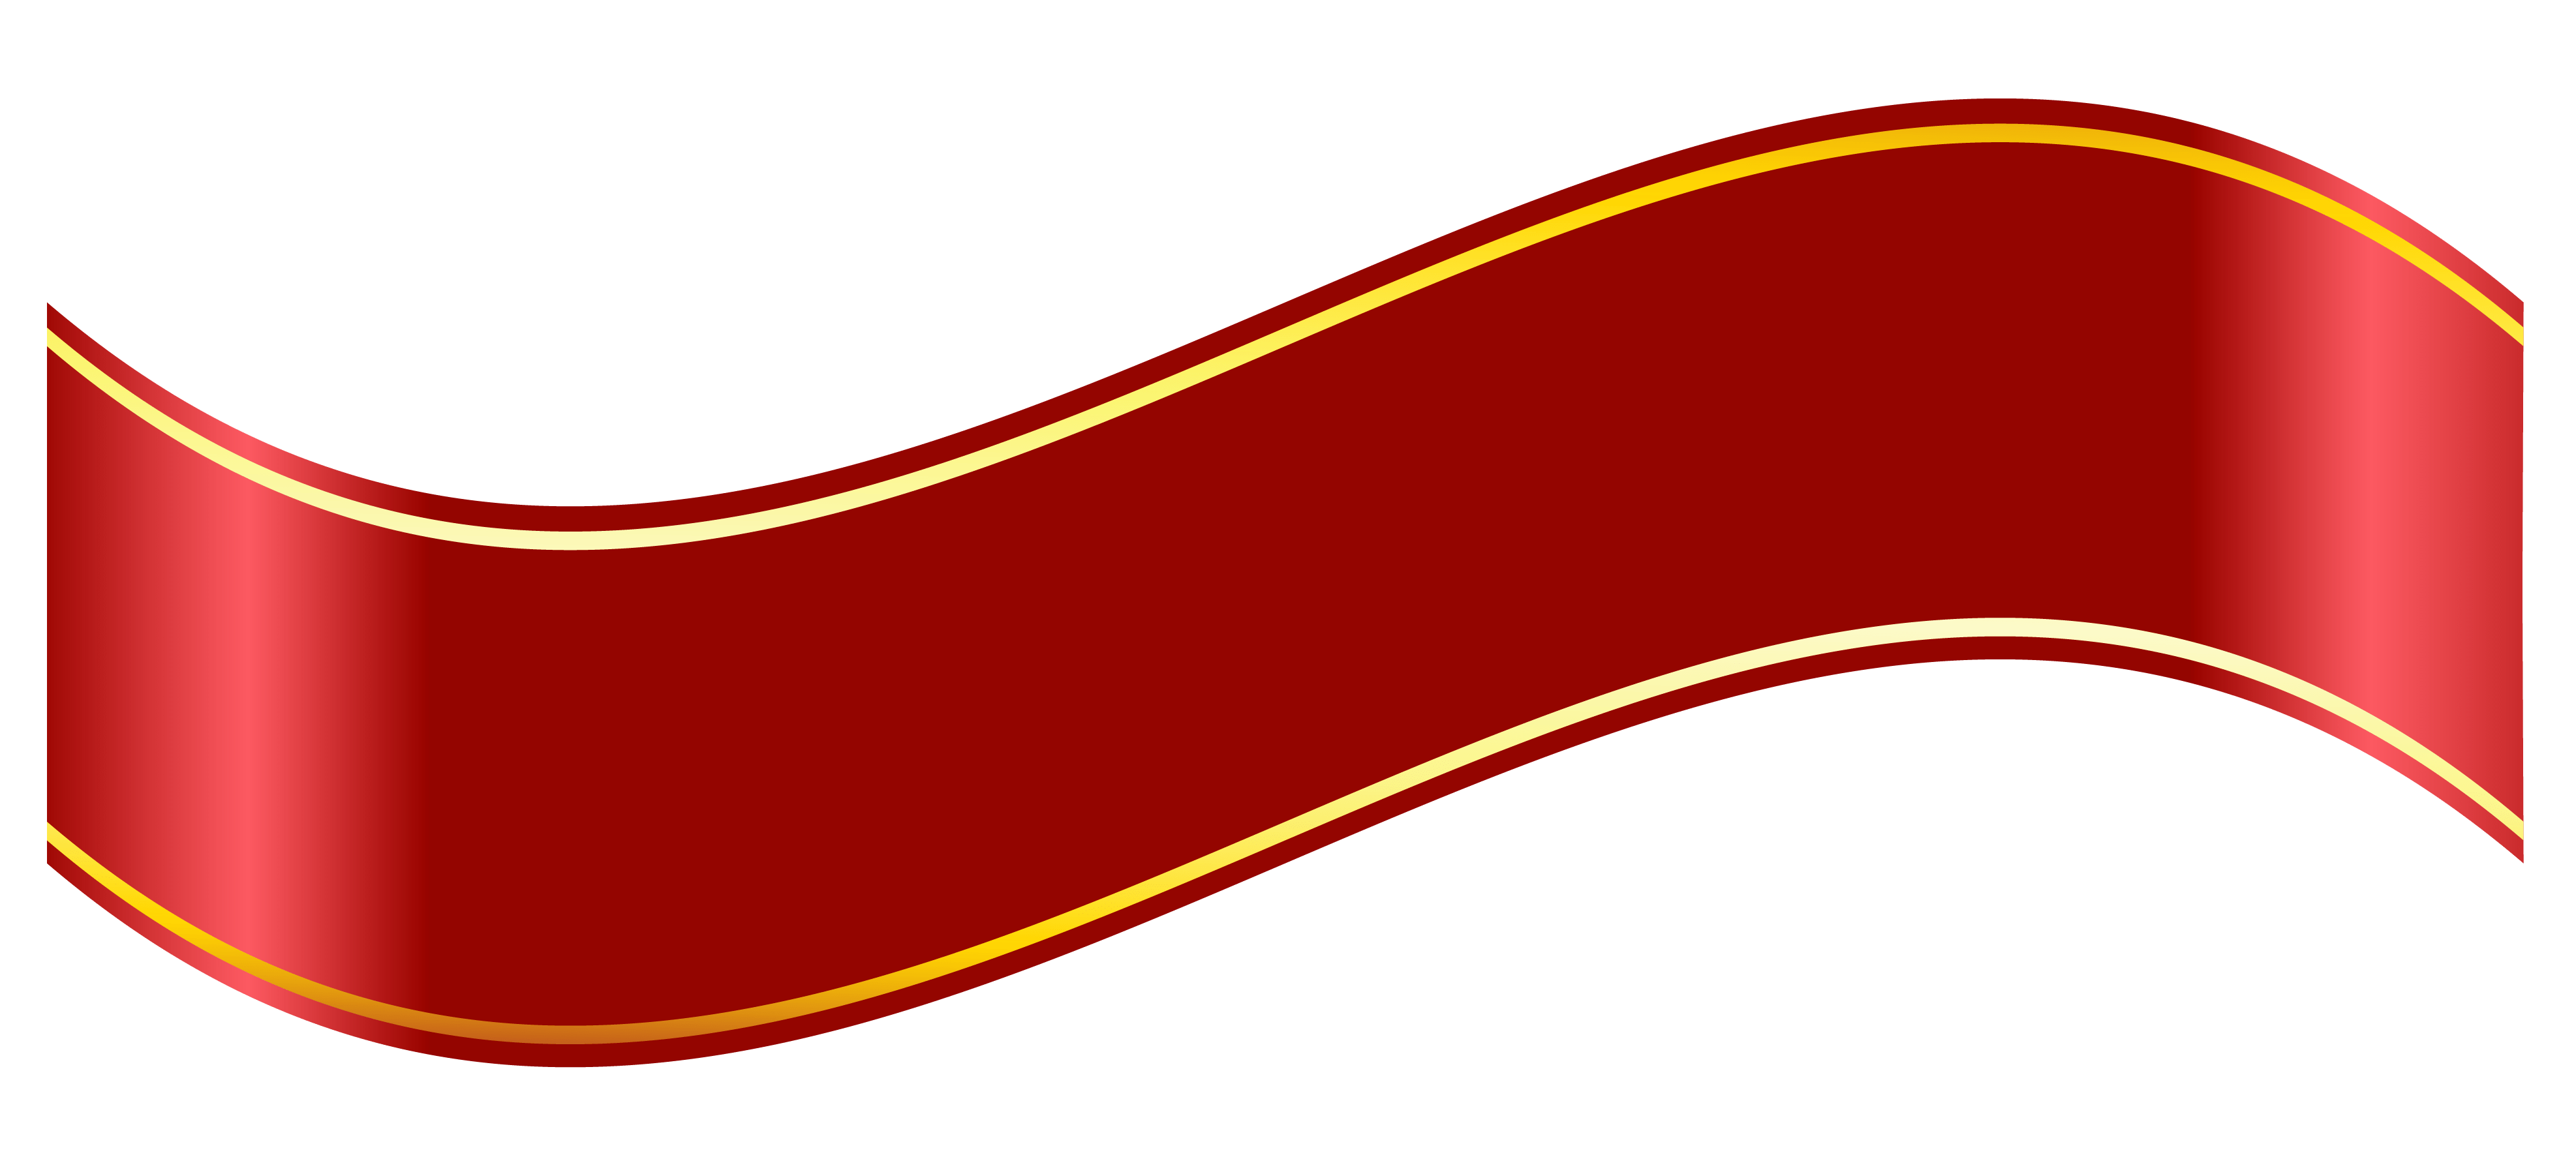 Red scroll clipart.